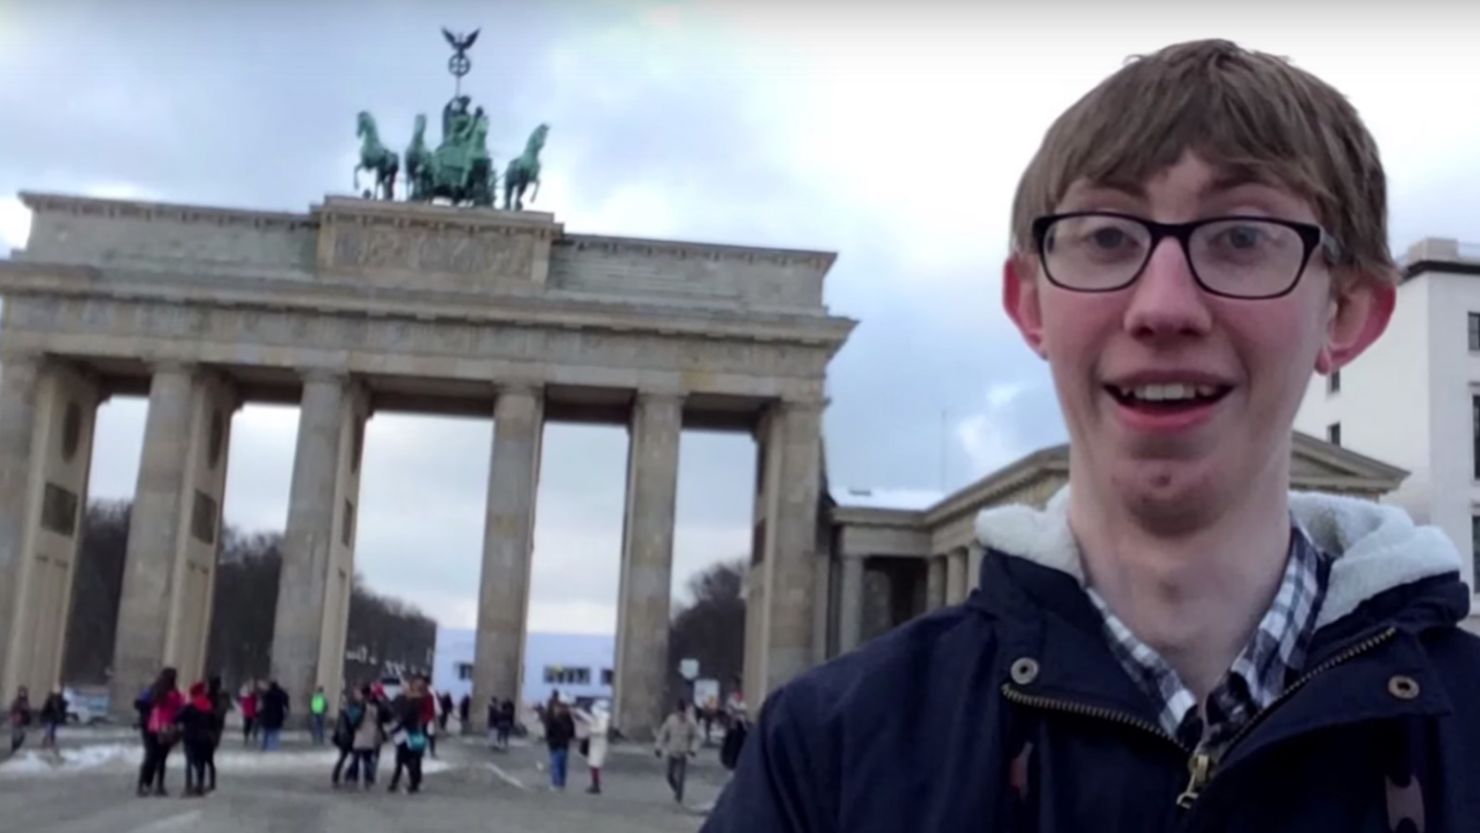 Planning a trip round England? It may be cheaper to go via Berlin. An 18-year-old blogger saved $11 and added 1,000 miles to his journey by taking a sight-seeing detour to Berlin on his trip from the north of England to the south 